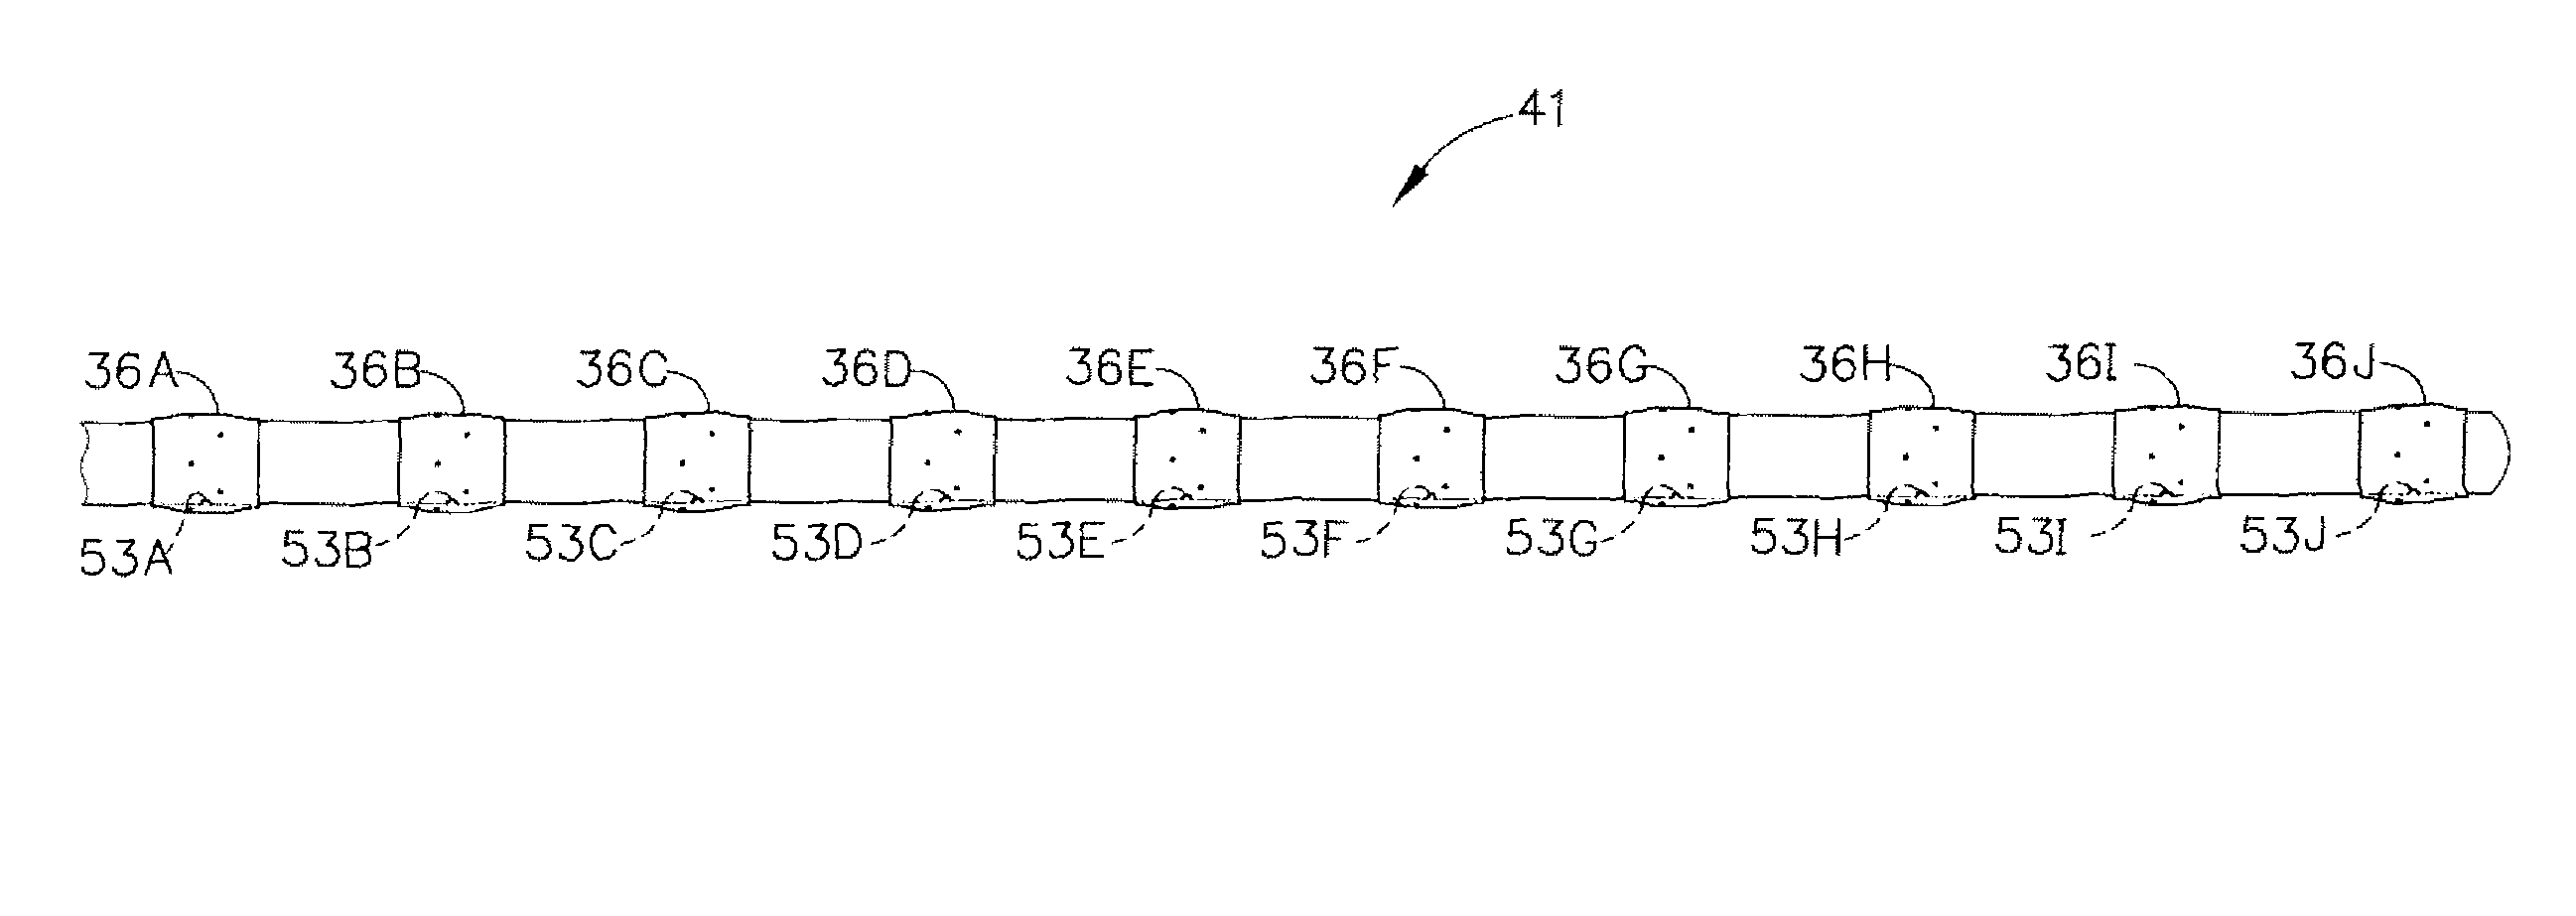 Dual-purpose lasso catheter with irrigation using circumferentially arranged ring bump electrodes